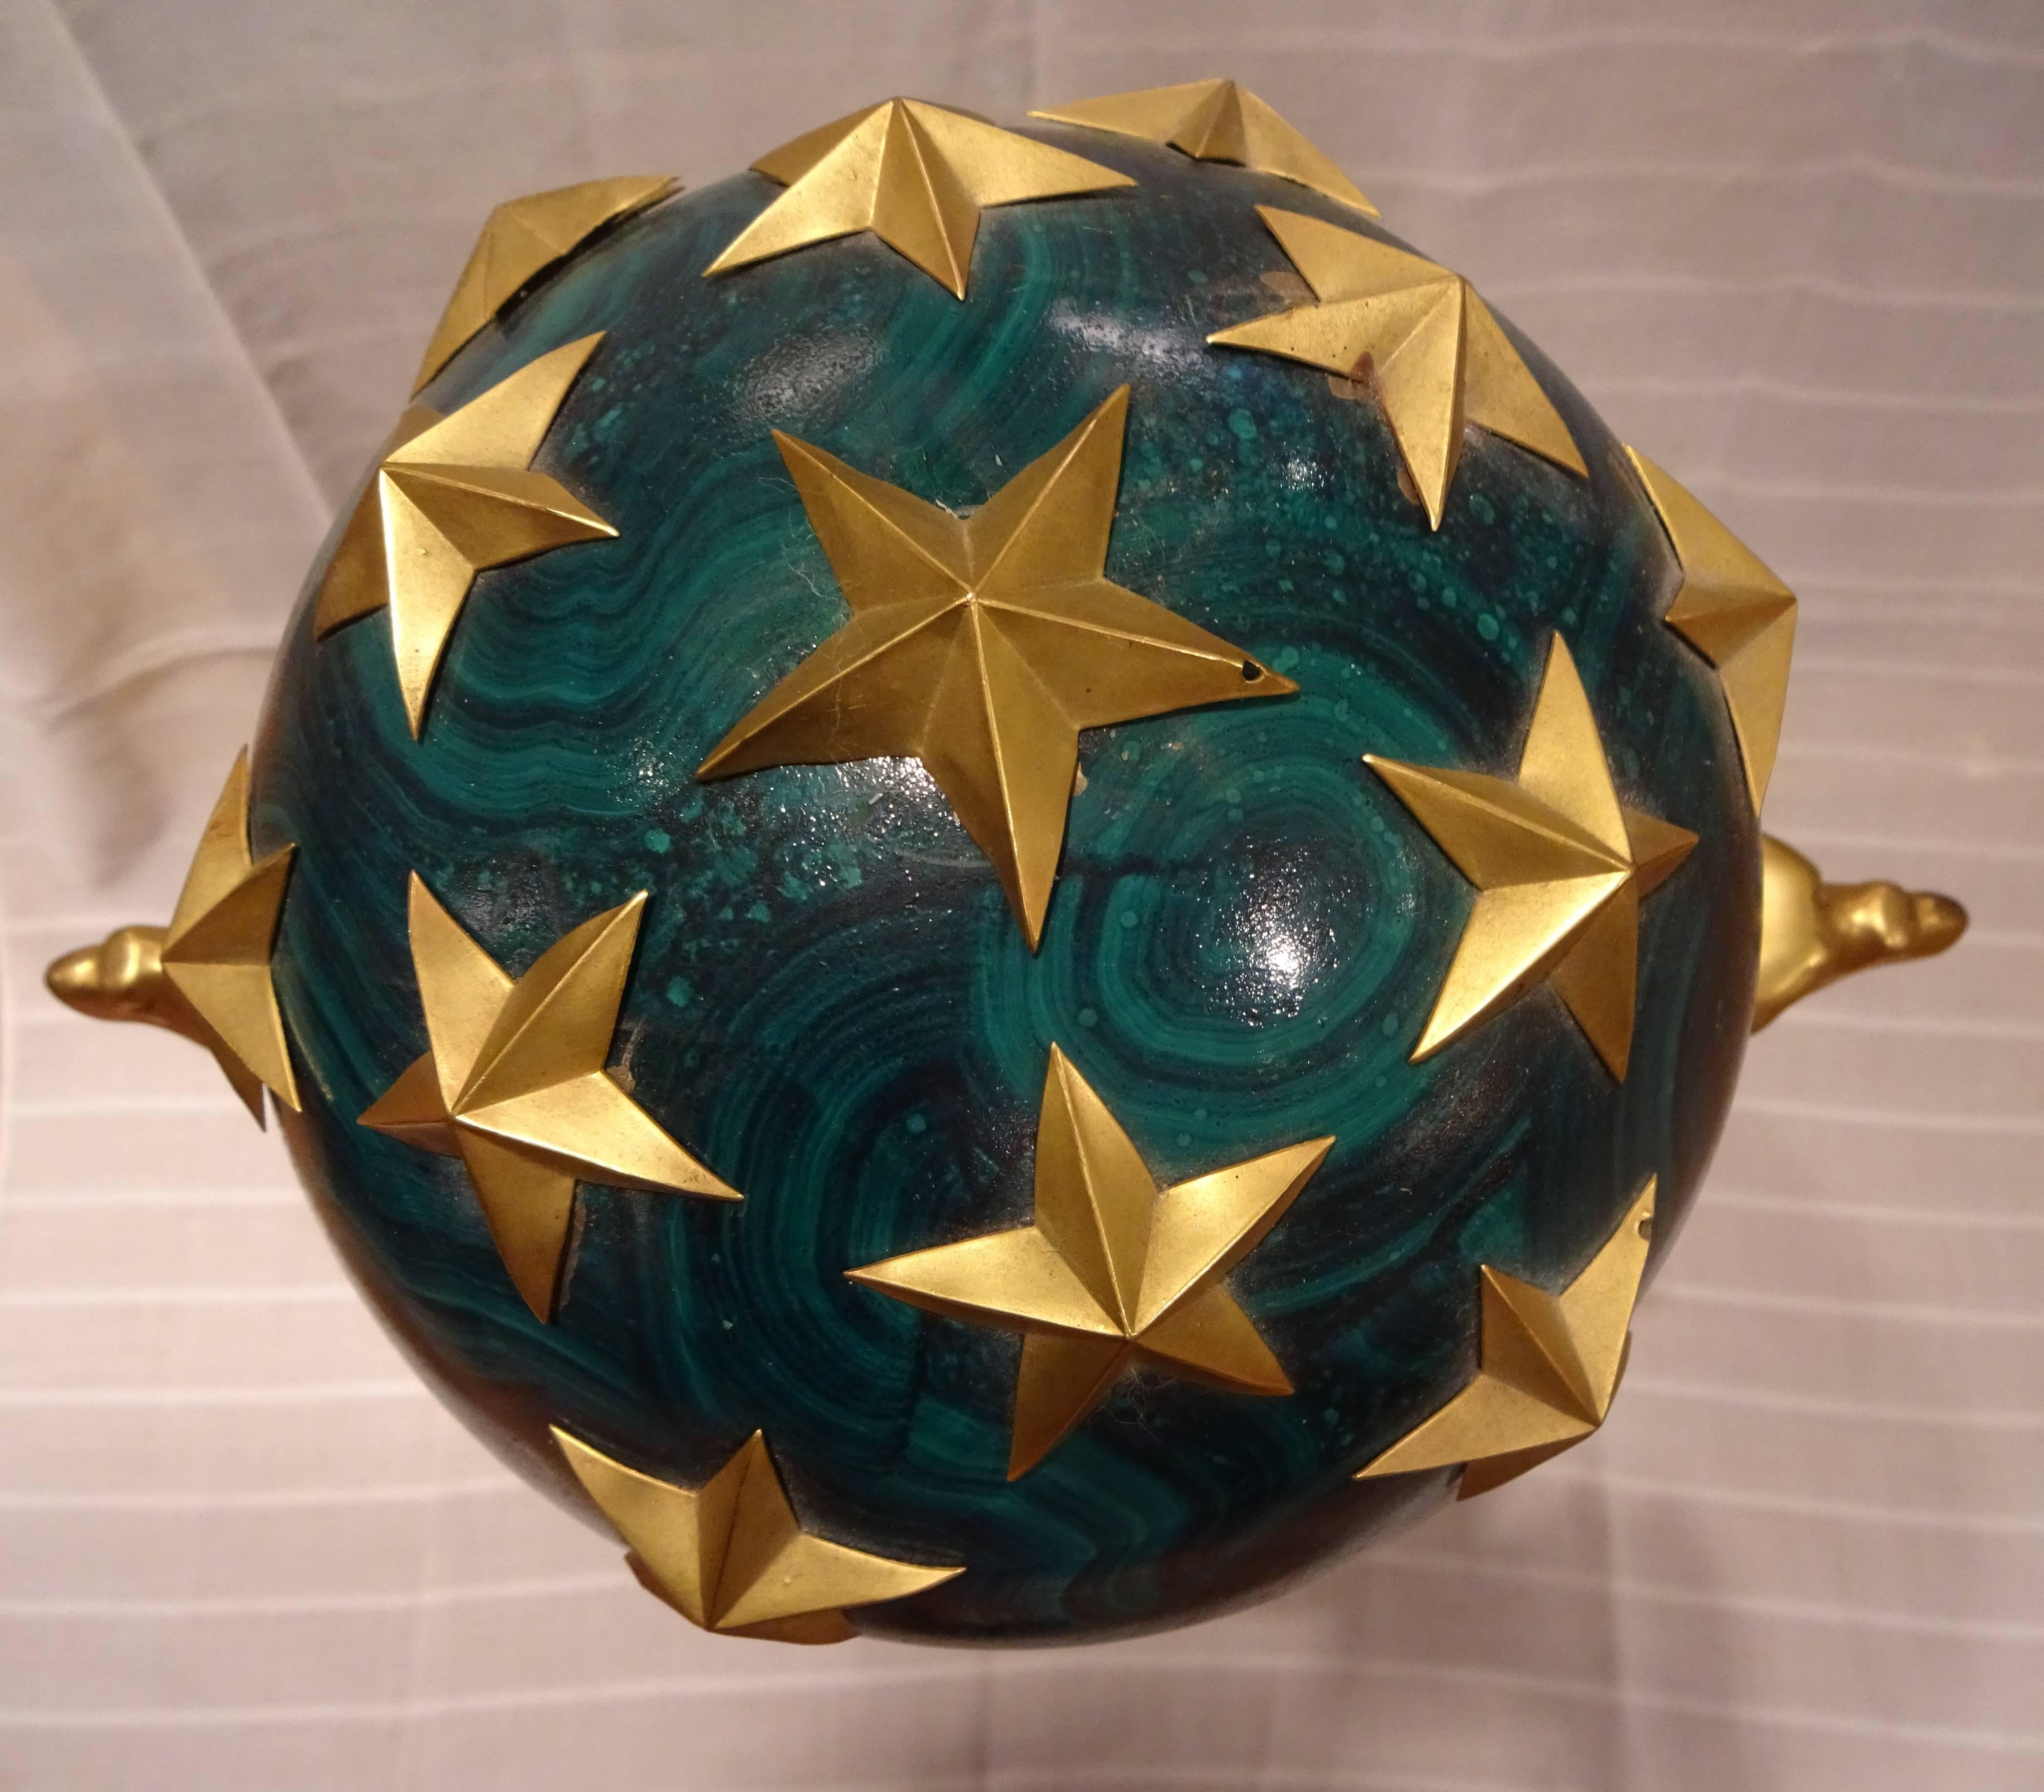 Exceptional gilt bronze French chenets
Representing pair of eagles holding a sphere embellished by gilt stars
Sphere painted in Malachite finish
In the style of Pierre Philippe Thomire 